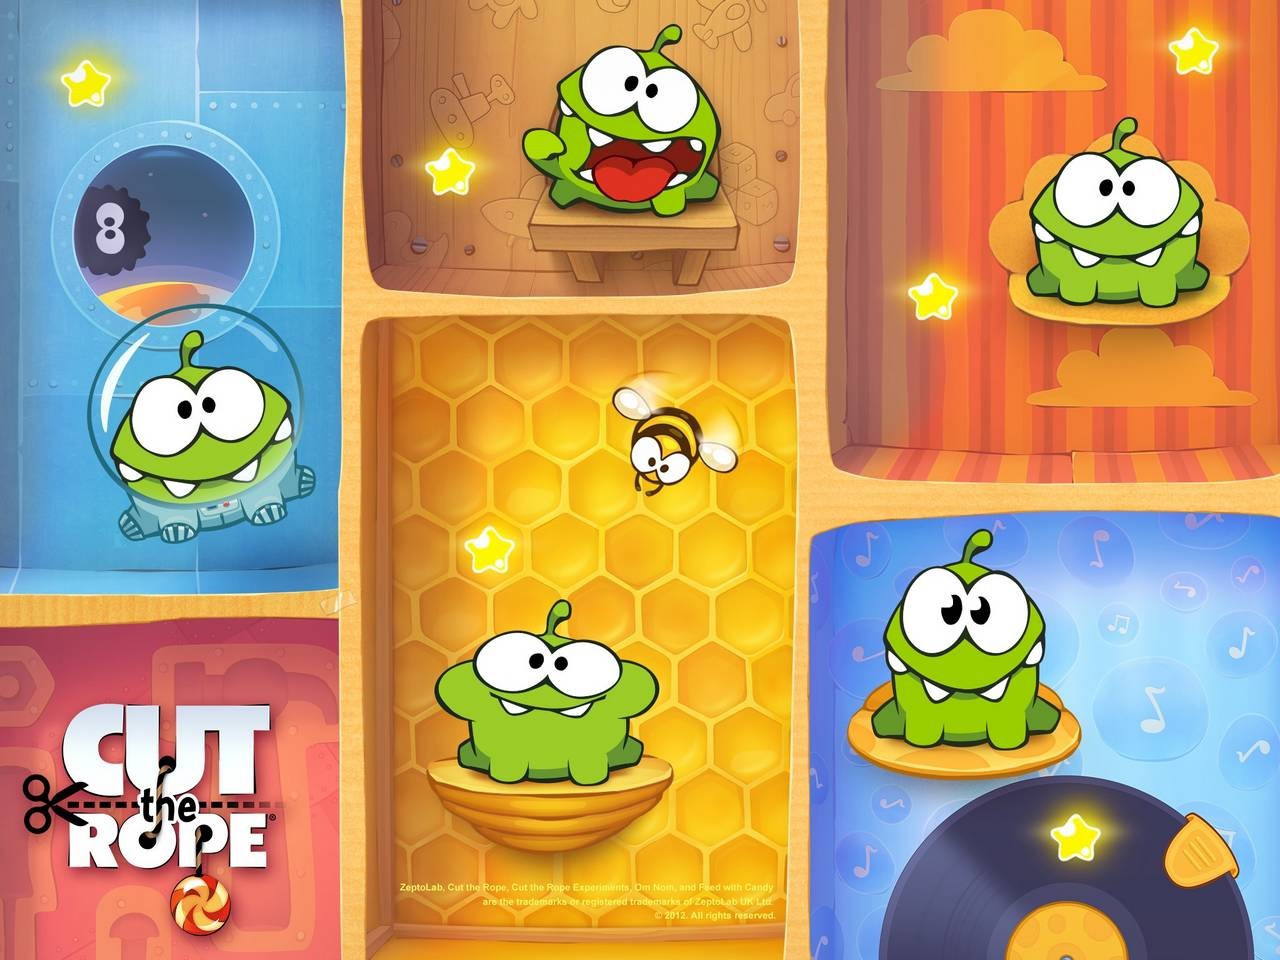 Cut the Rope is getting a film adaptation late next year